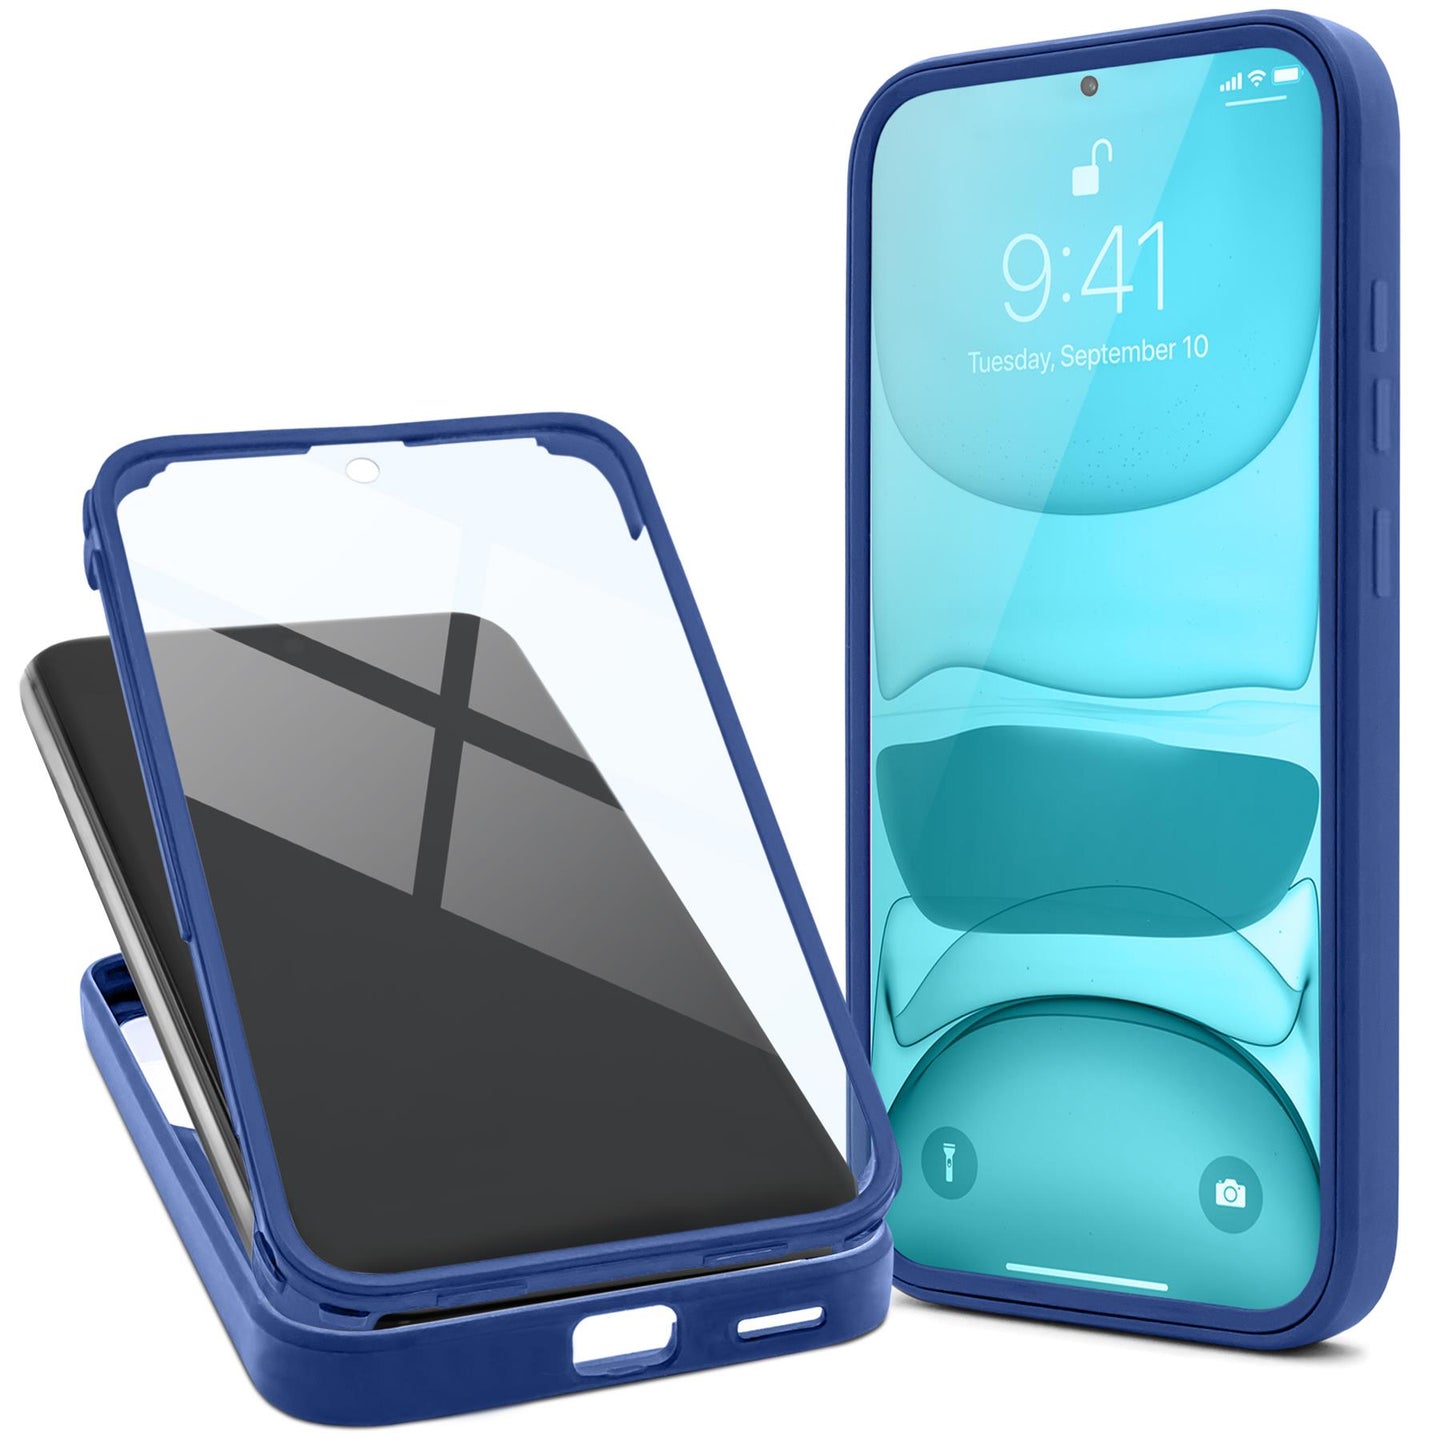 Moozy 360 Case for Xiaomi 12T and 12T Pro - Blue Rim Transparent Case, Full Body Double-sided Protection, Cover with Built-in Screen Protector